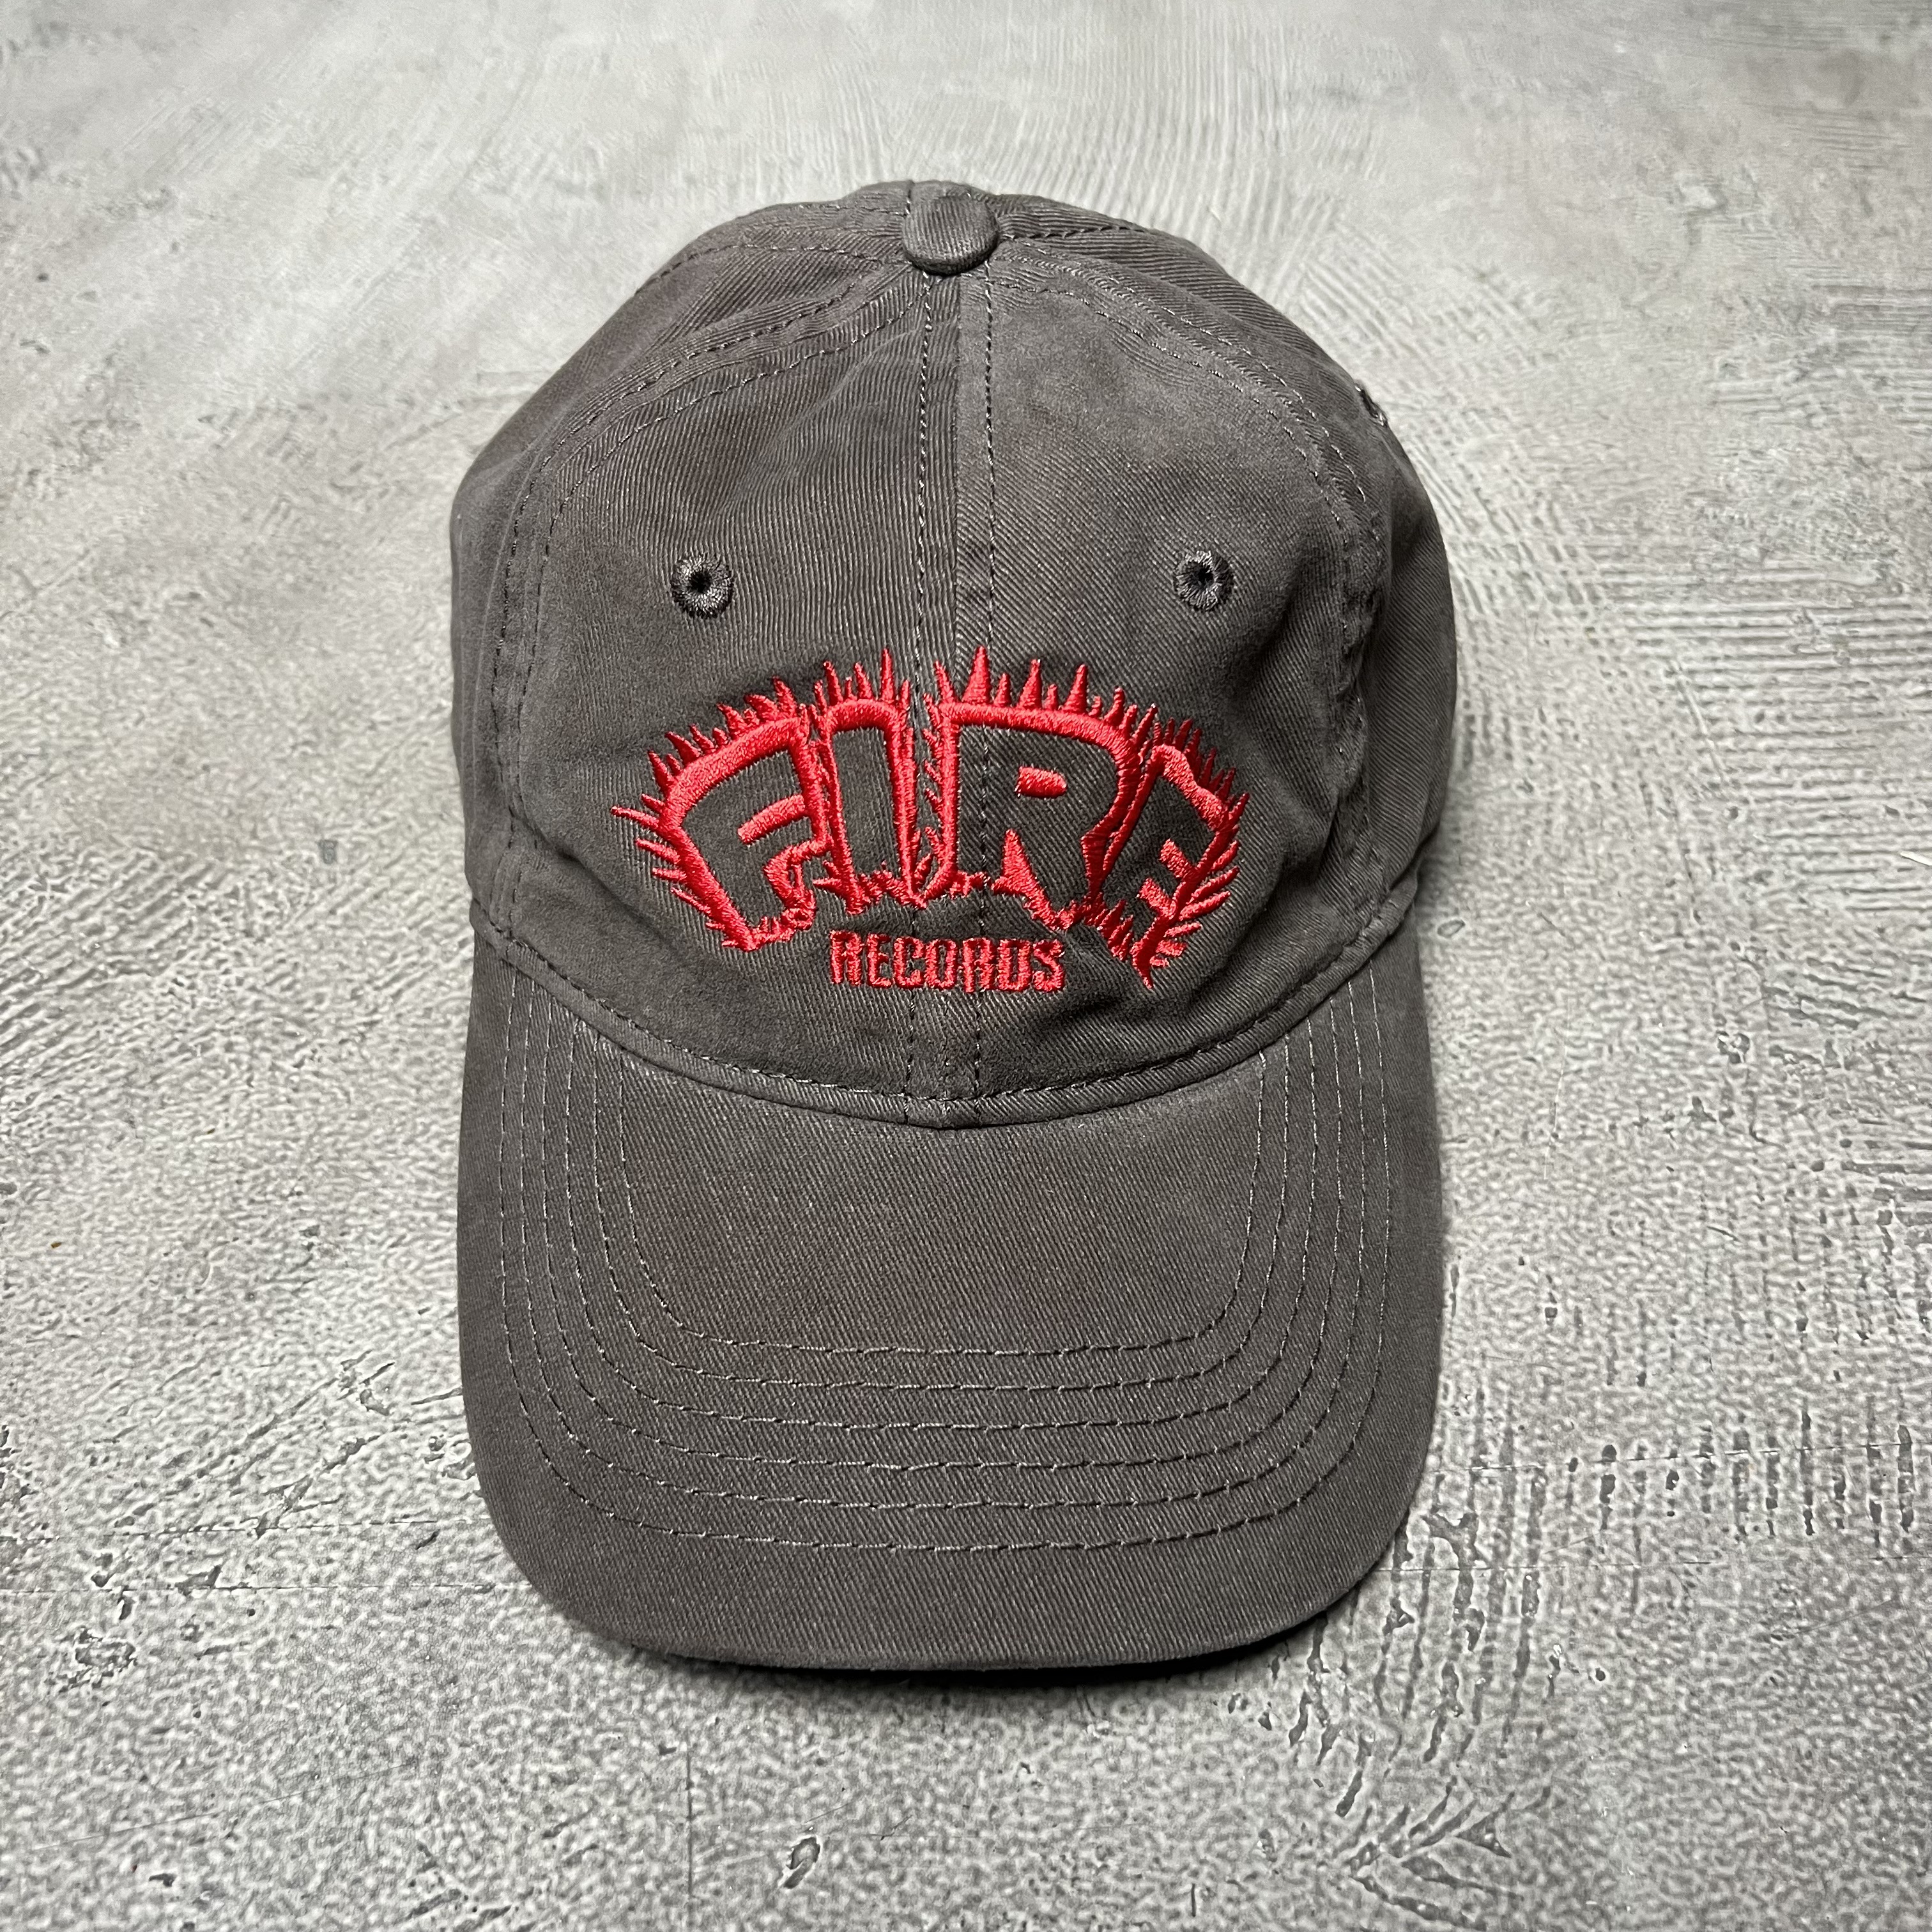 "FIRE RECORDS HAT"